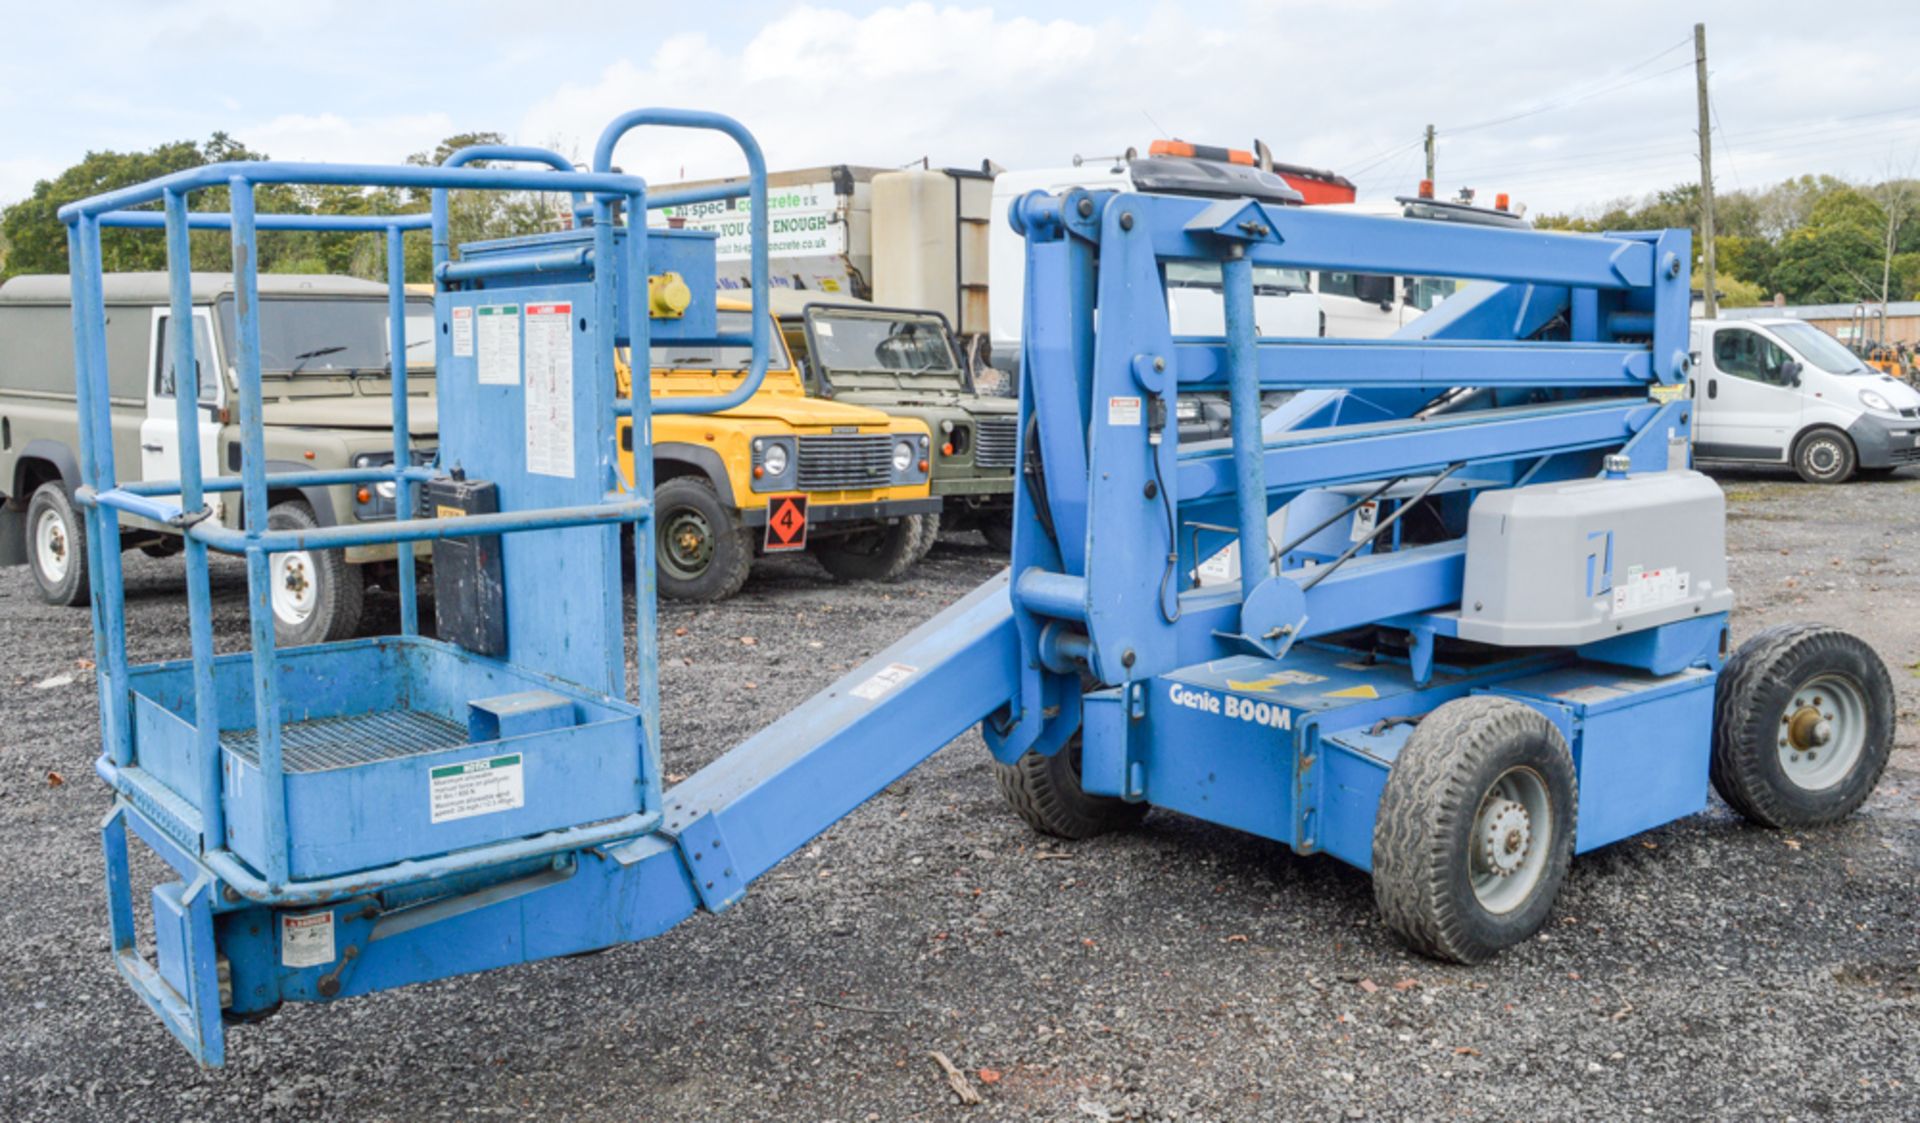 Genie Boom Z45/22 45 ft battery electric articulated boom lift access platform Year: 1997 S/N: